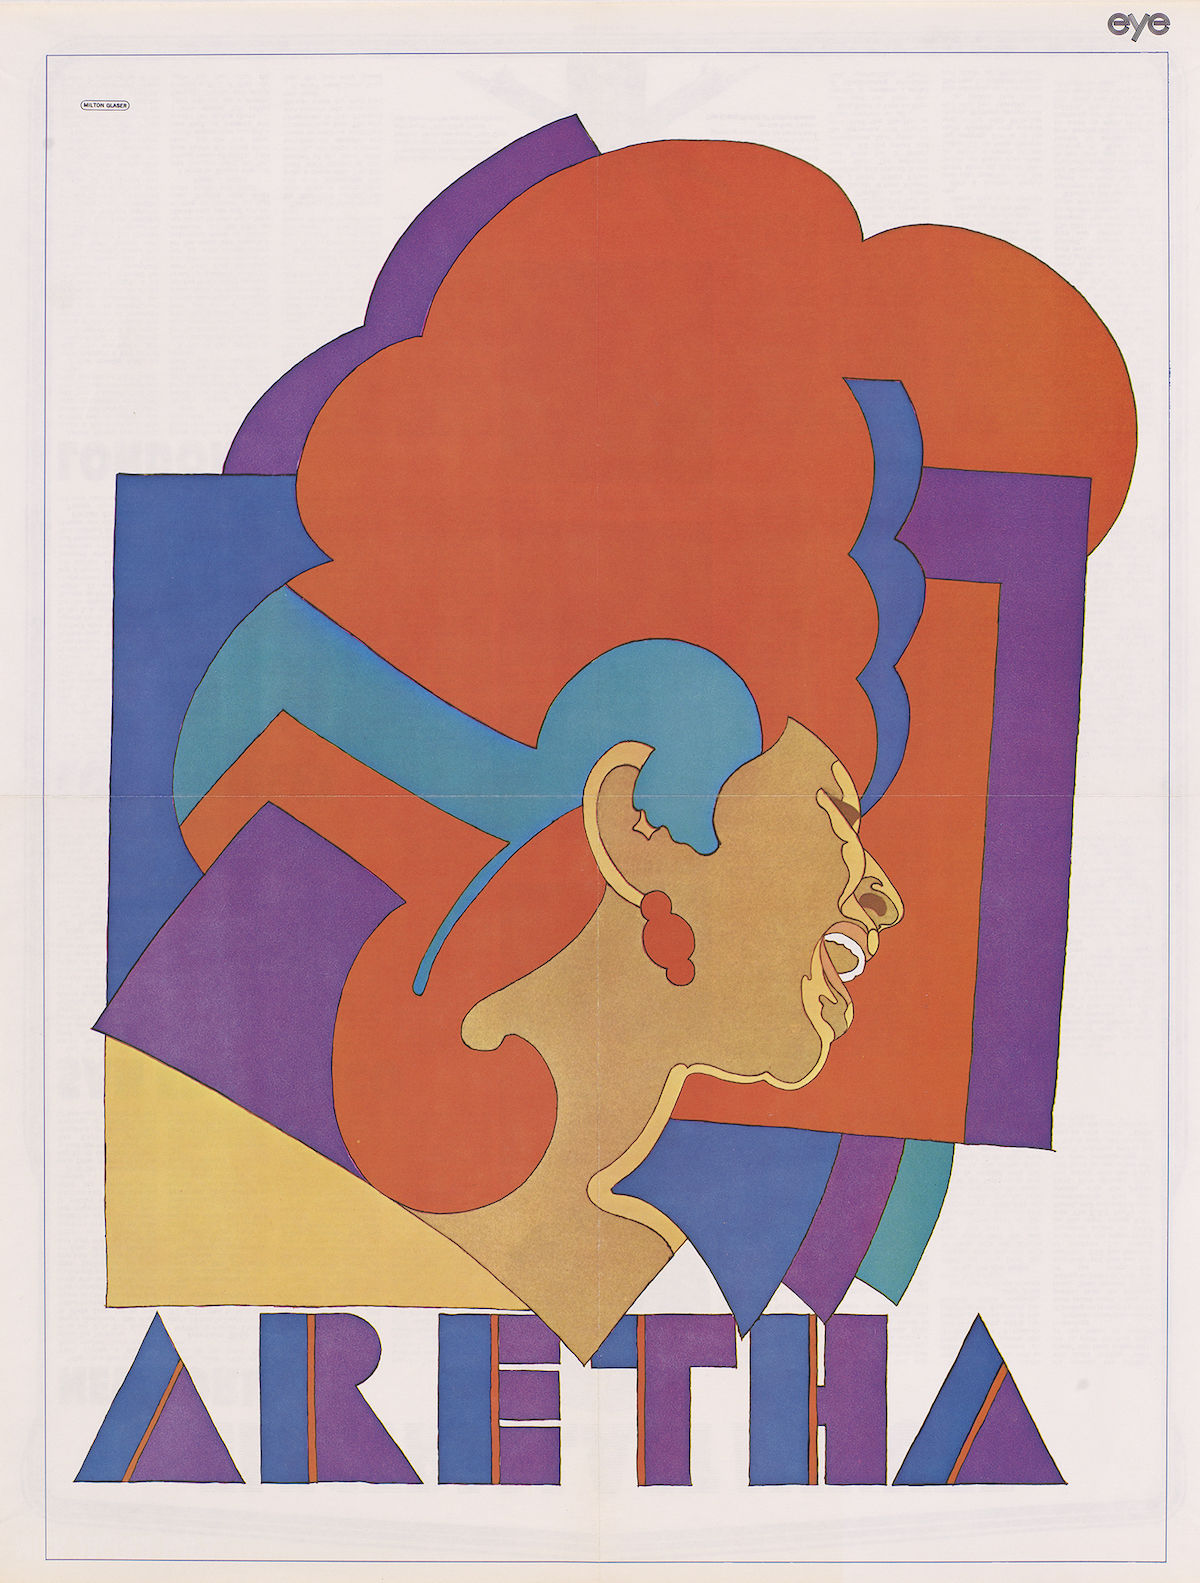 Aretha Franklin by Milton Glaser, colour photolithographic poster, 1968. Courtesy National Portrait Gallery, Smithsonian Institution Â© Milton Glaser